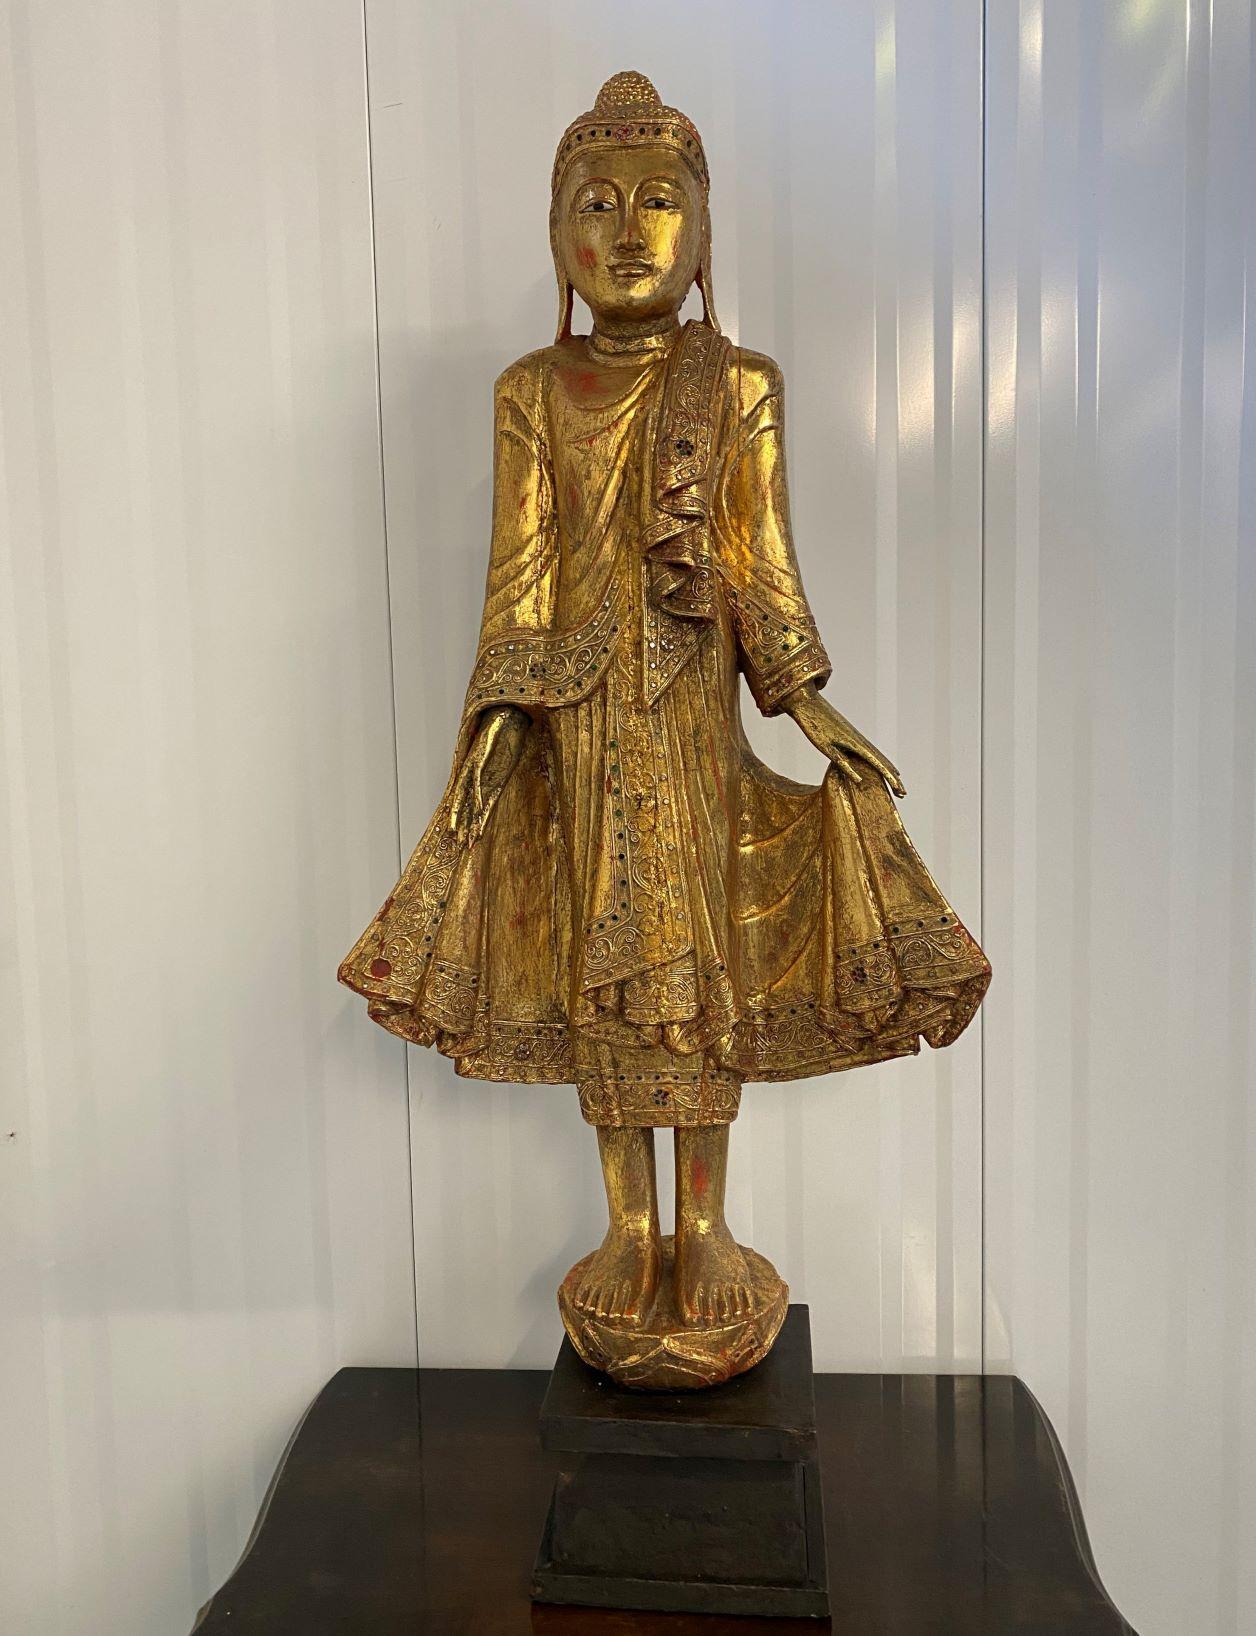 
Gorgeous hand-carved antique Burmese buddha statue with gilt finish, Burma, early 20th century.
This Buddha is depicted standing with hands poised in the teaching mudra, with meditative face, studded hair with rounded ushnisha, wearing sanghati